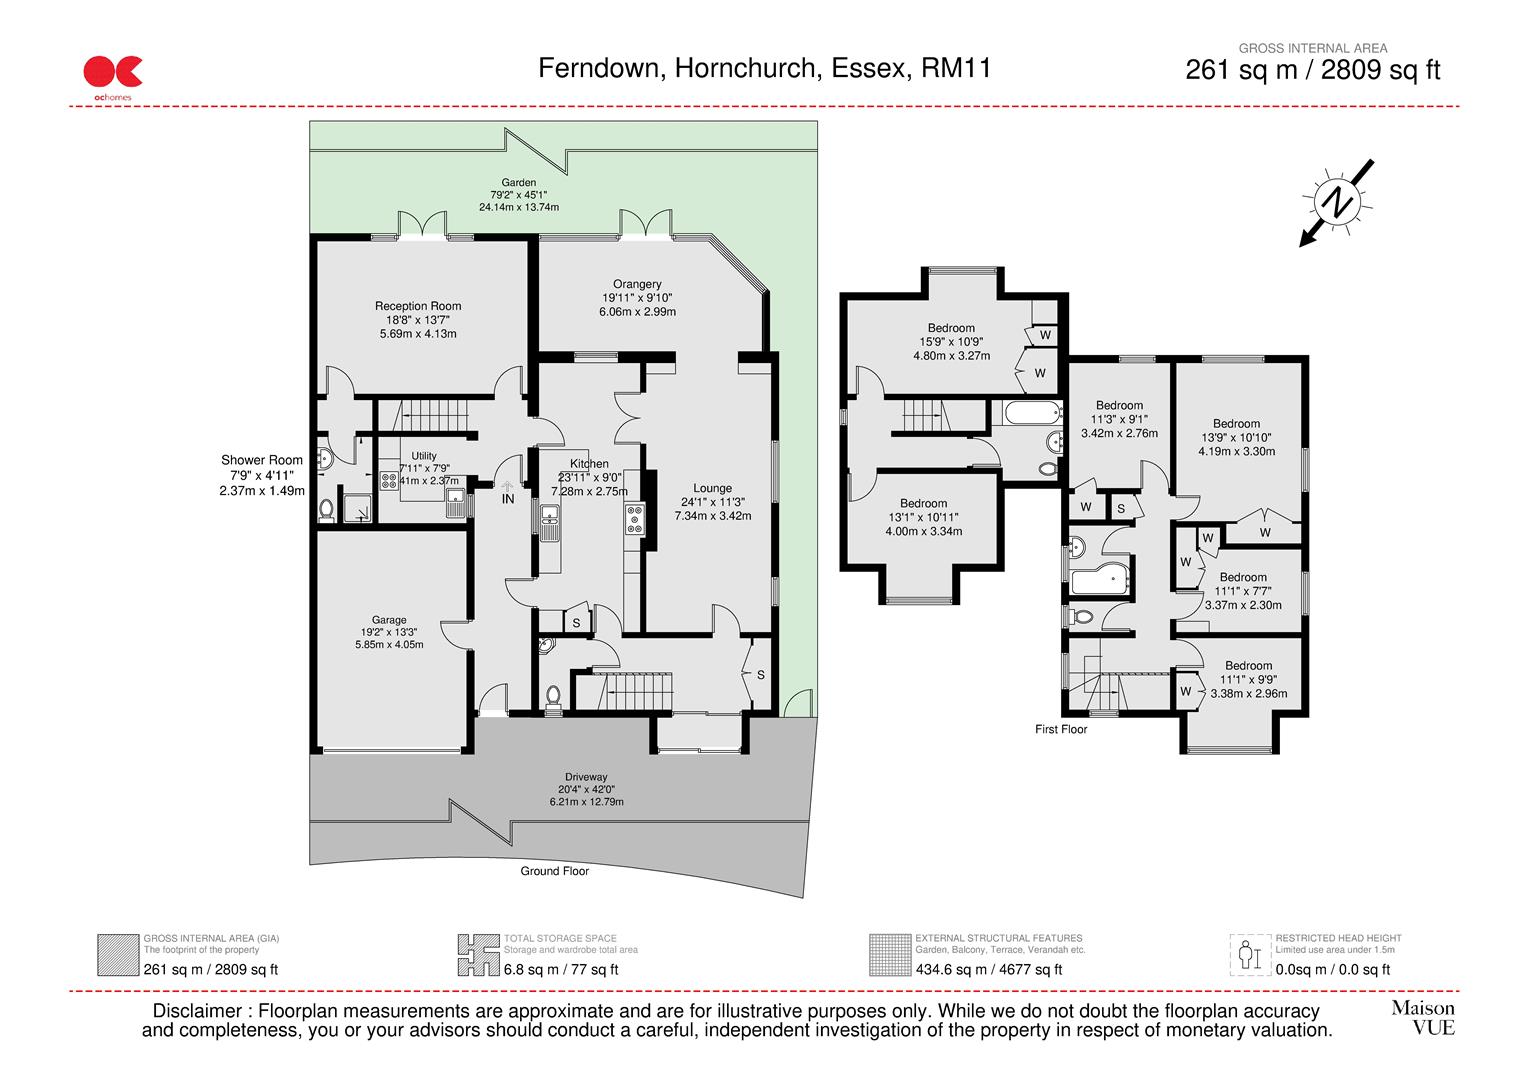 6 bed detached house for sale in Ferndown, Hornchurch - Property floorplan